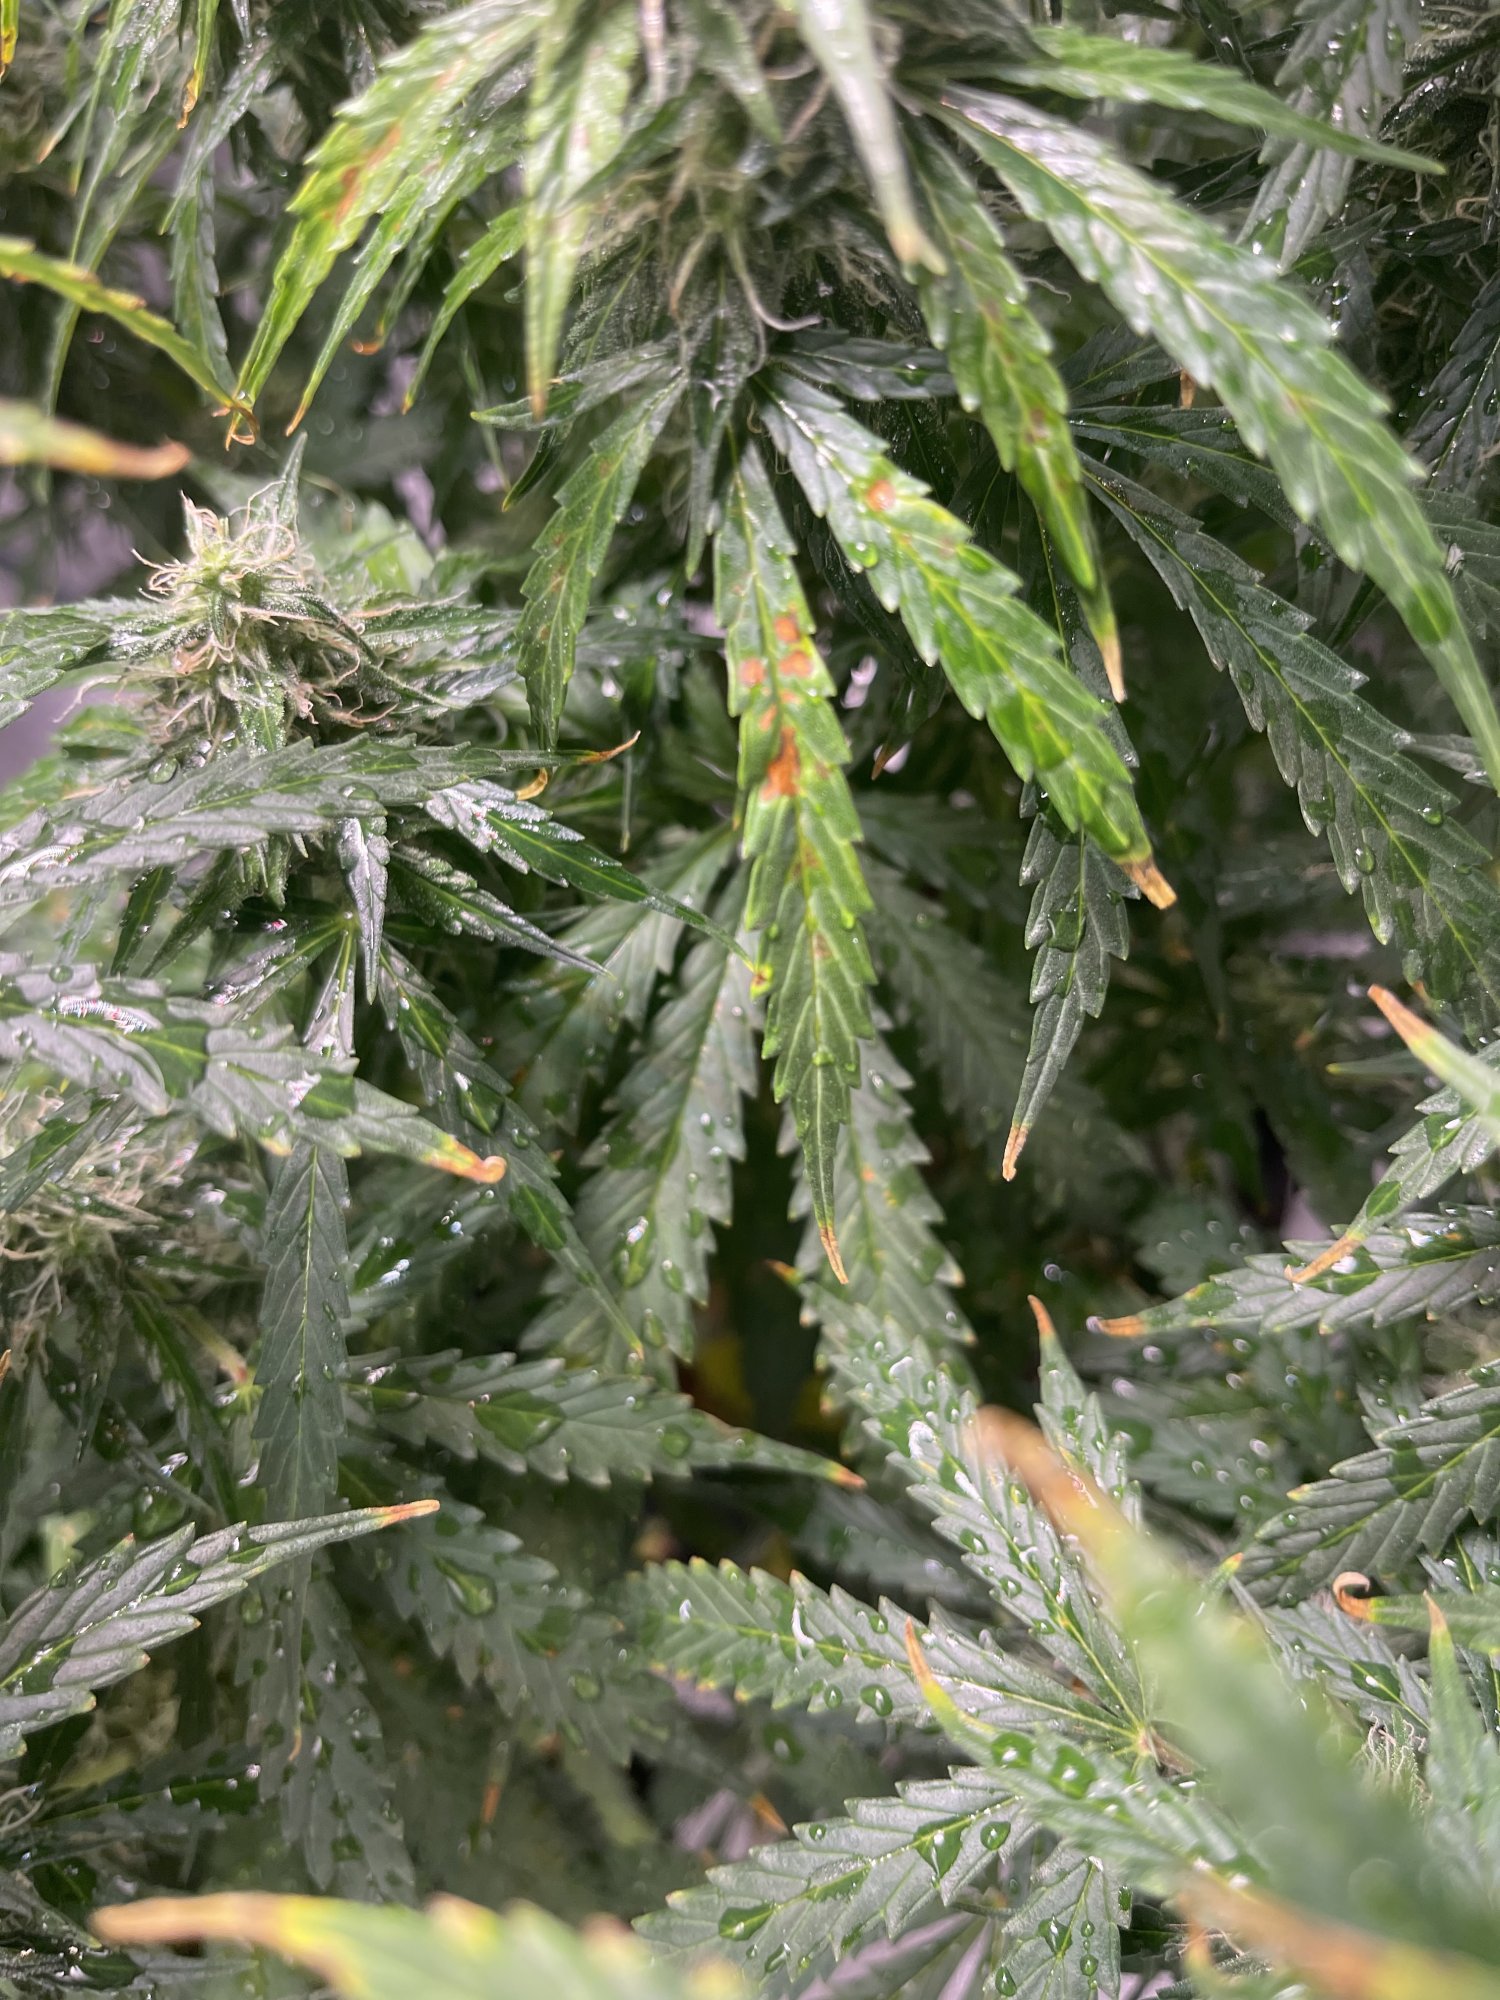 Problems with my northern lights auto